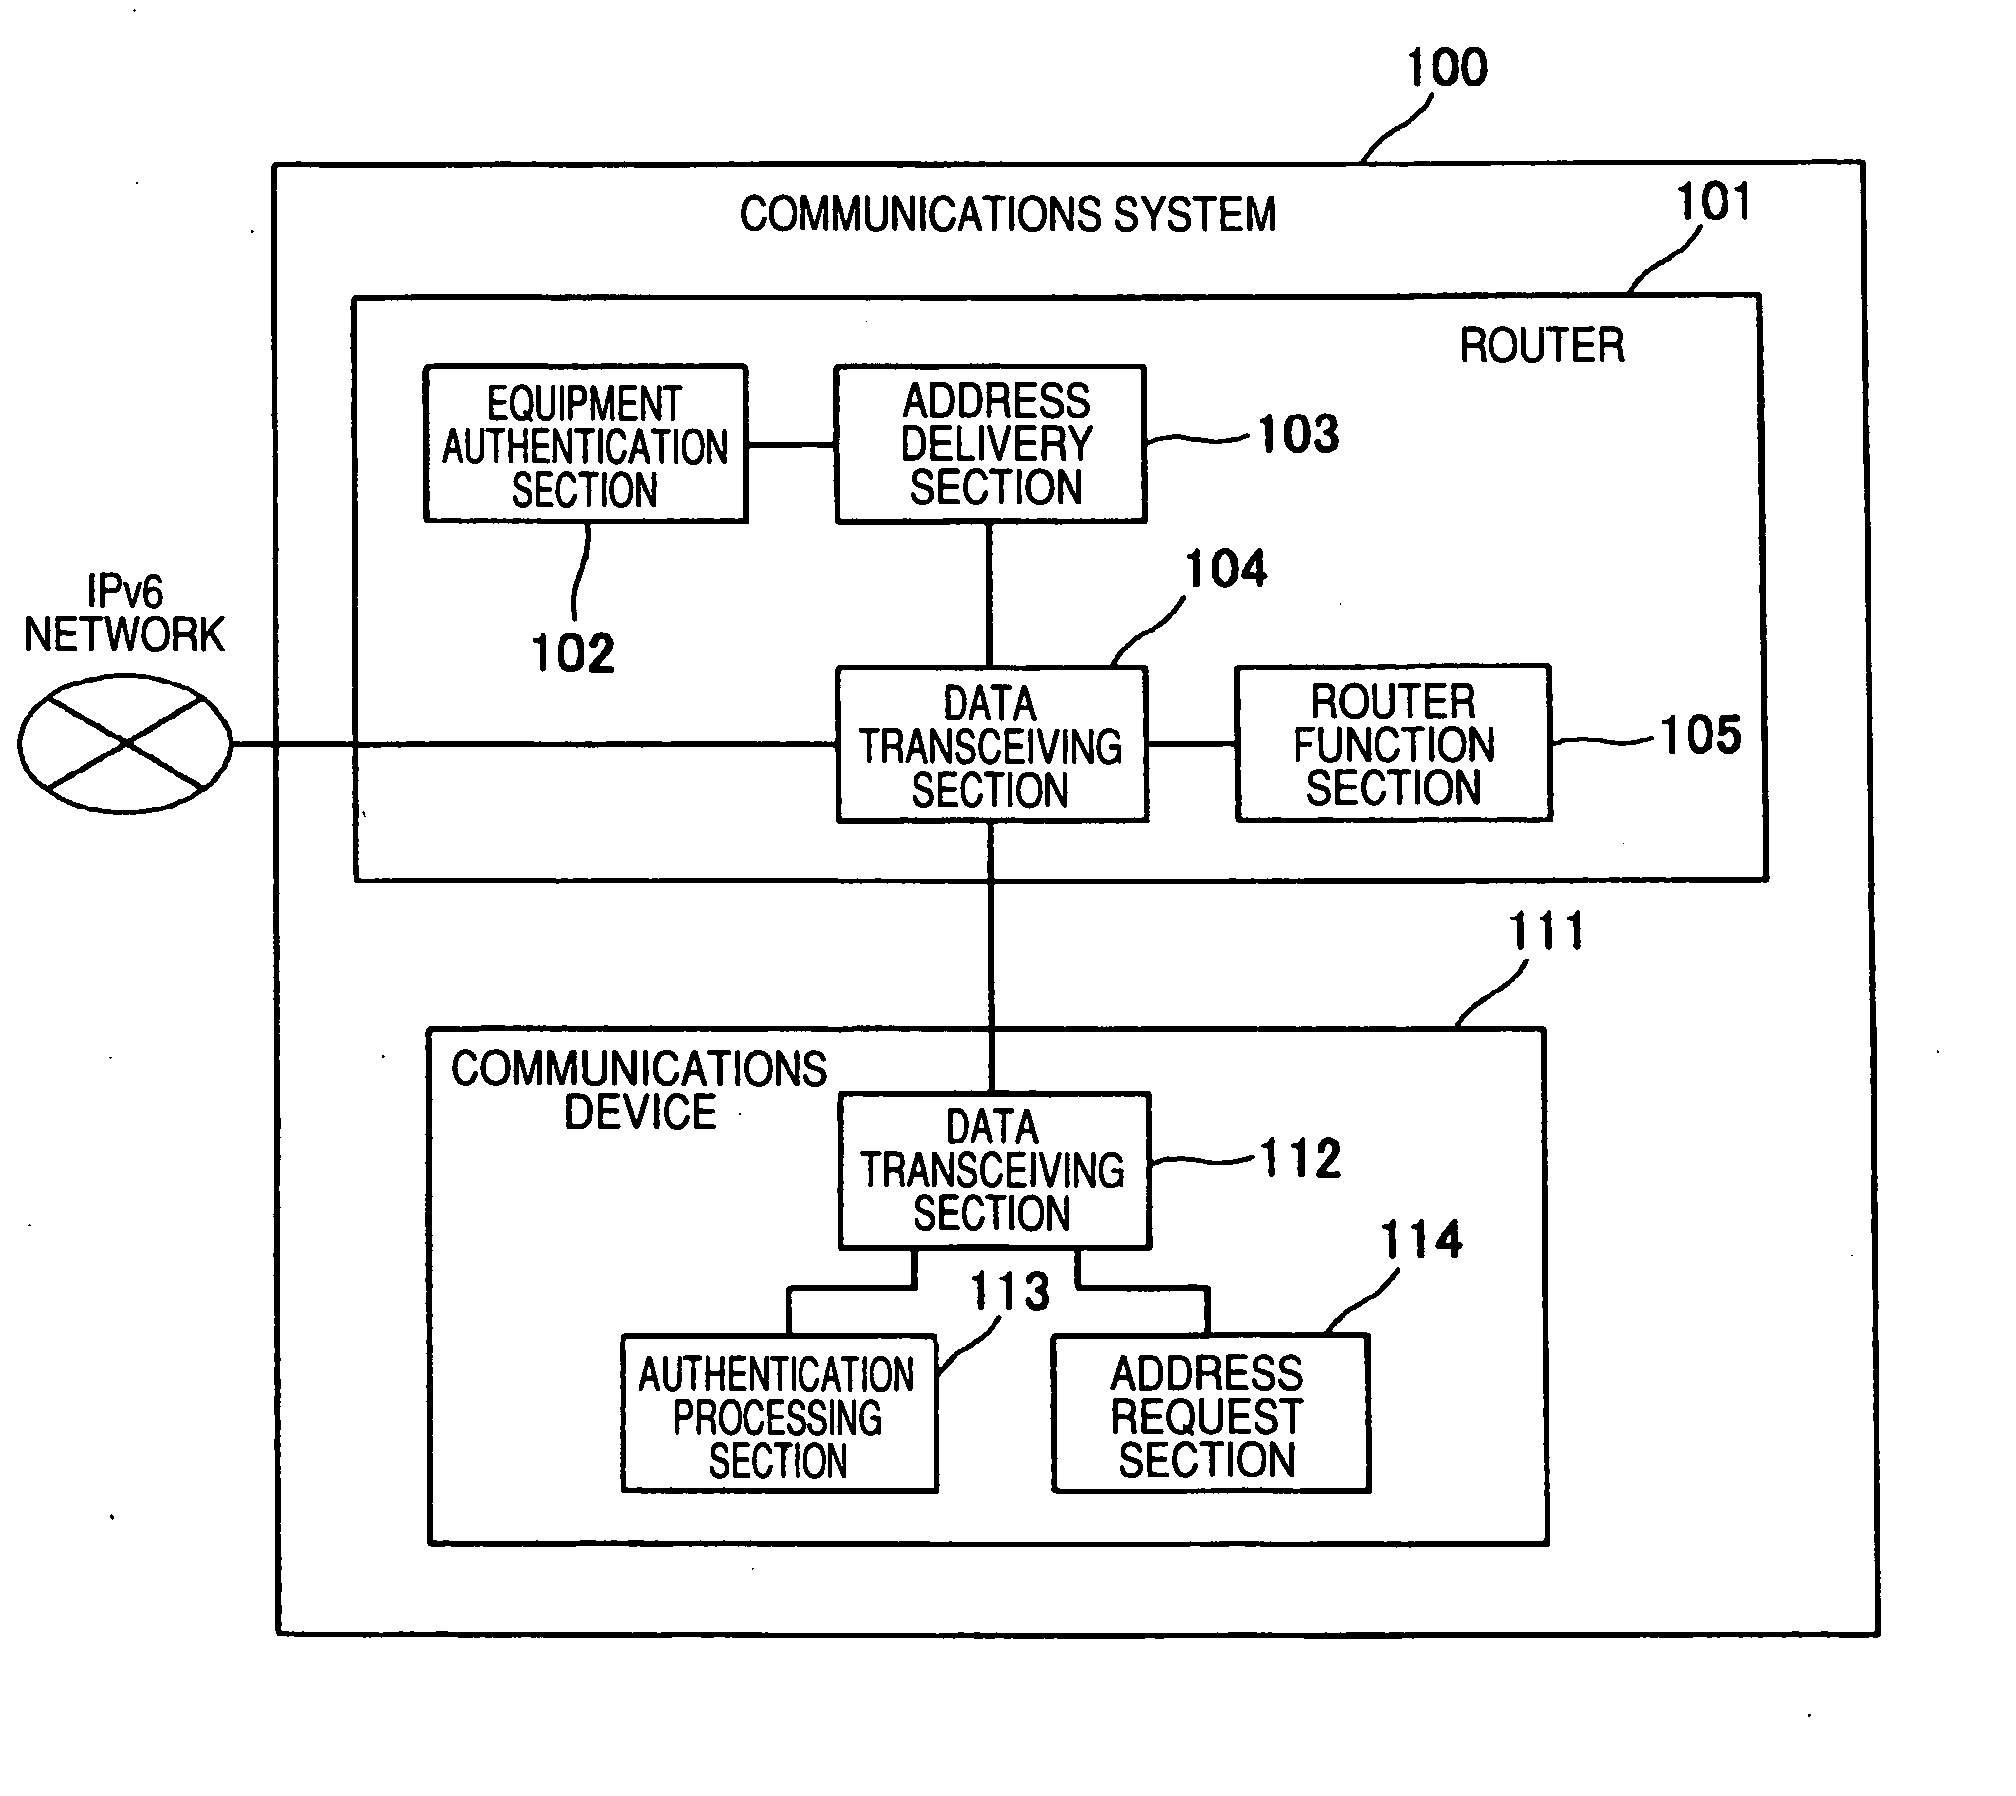 Device authentication system